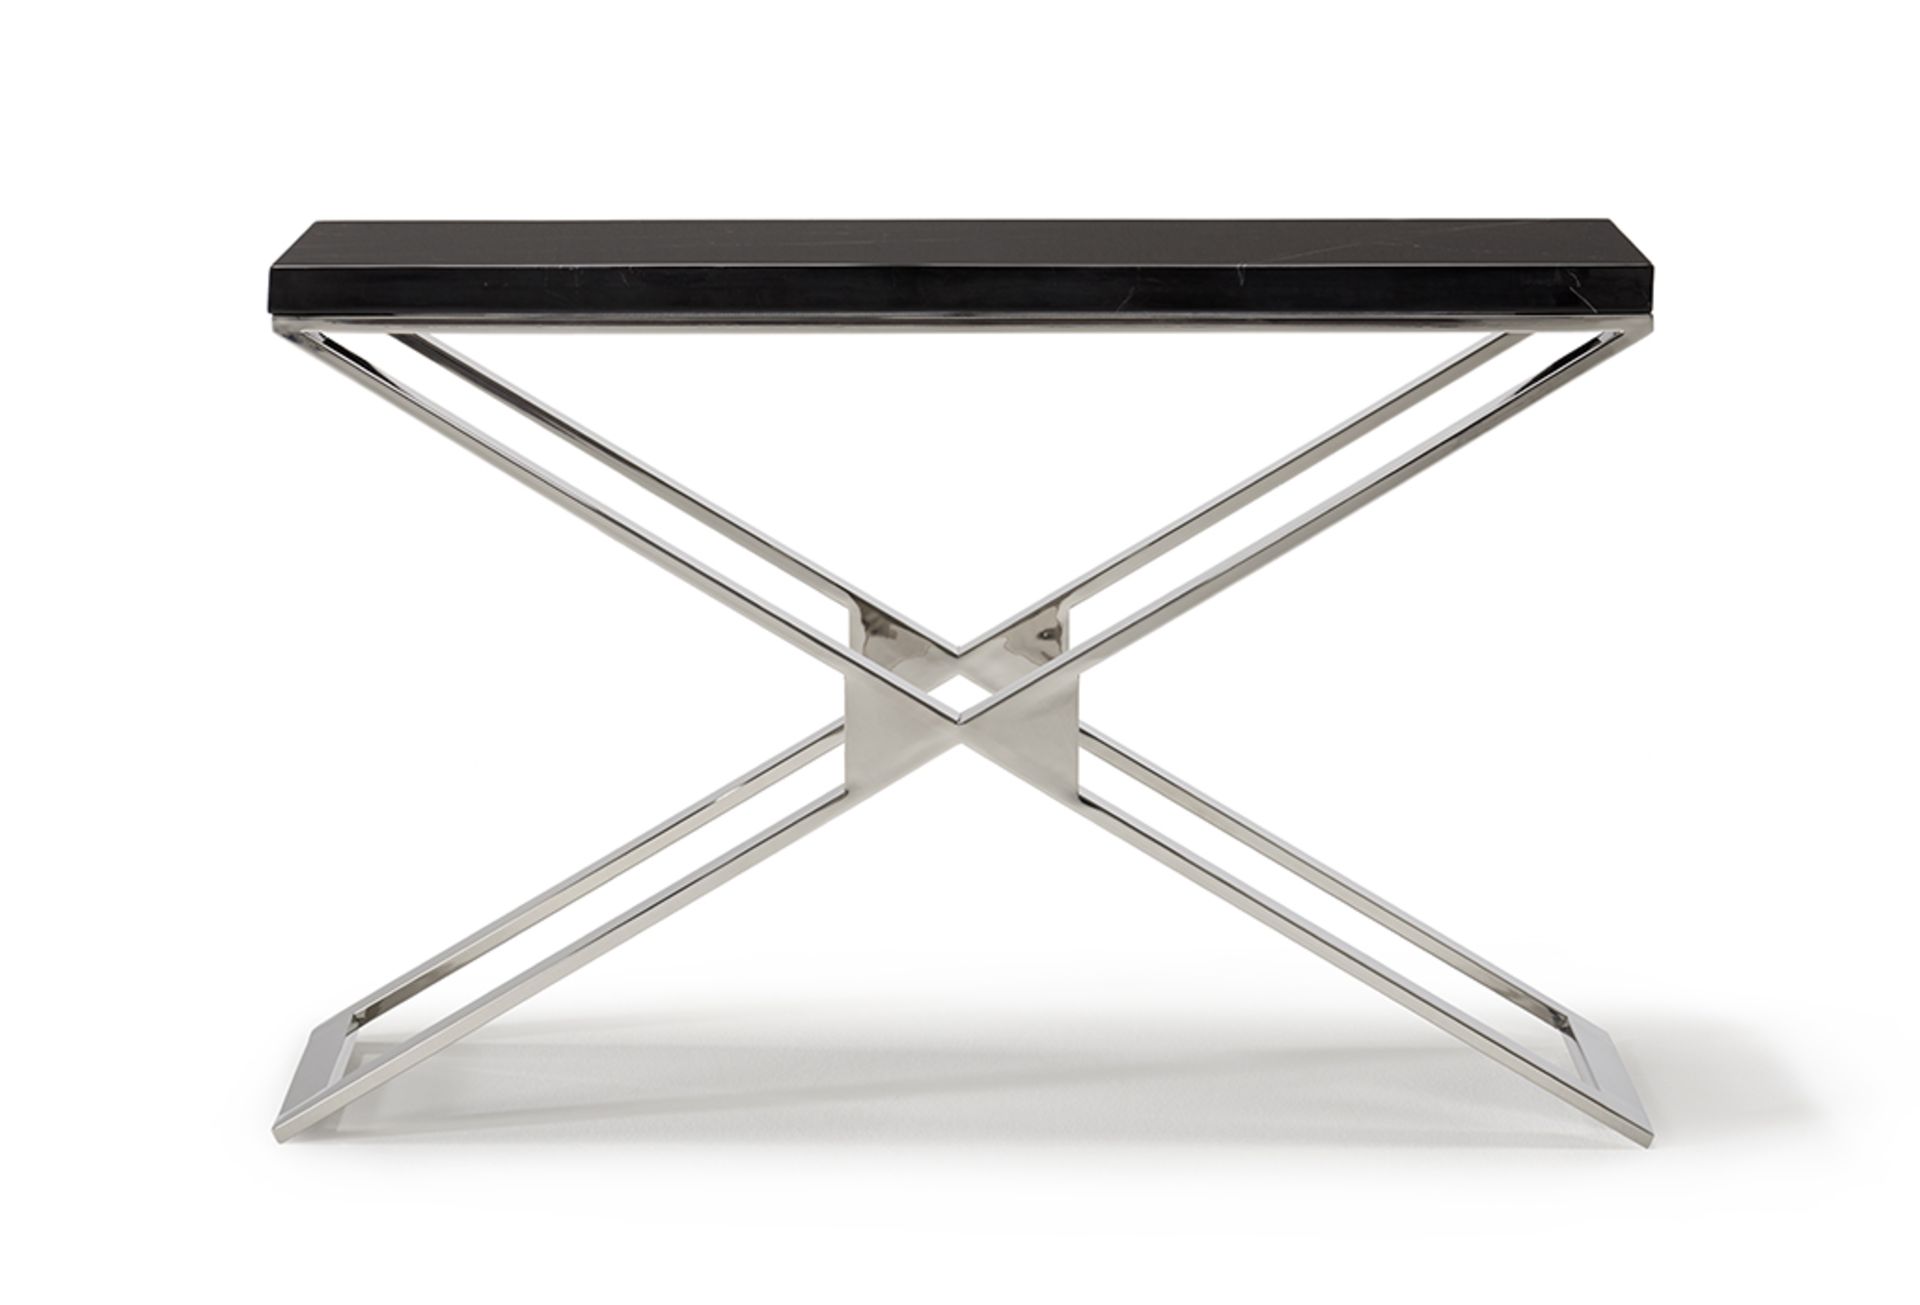 Zephyr Console Table by Kesterport This Console Table has a classic frame design which we have - Image 5 of 5